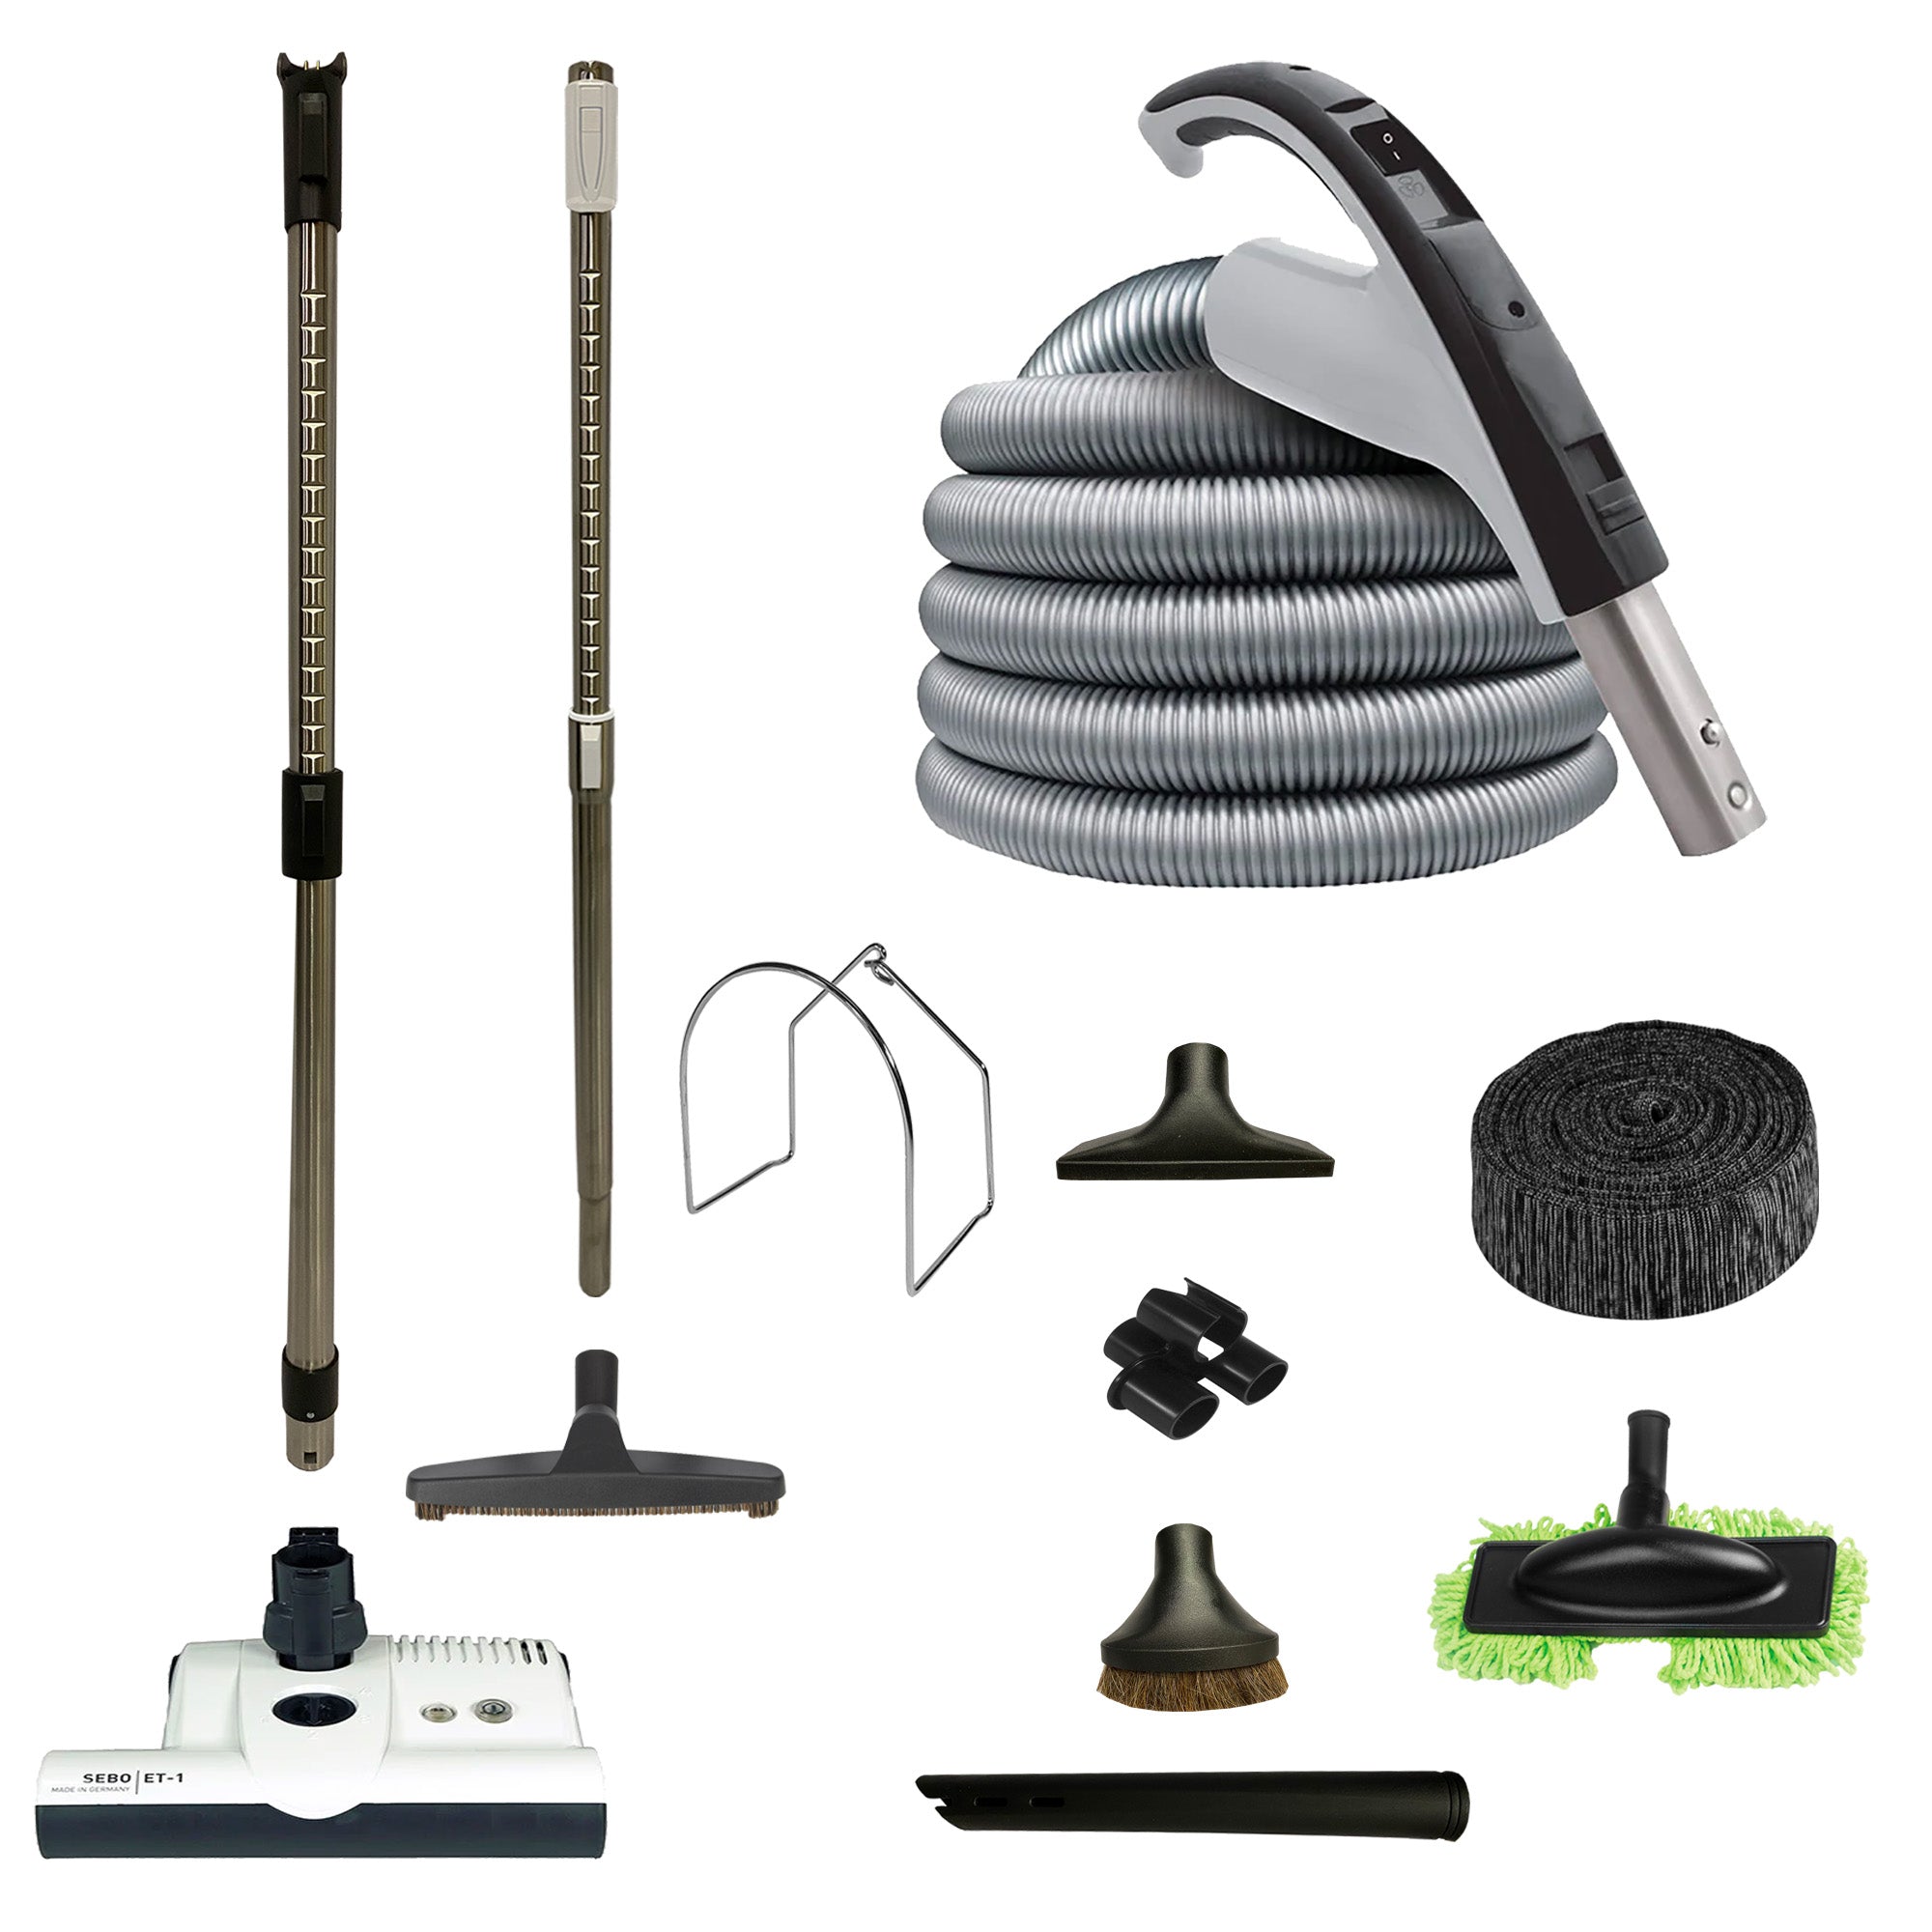 VPC Central Vacuum Accessory Kit with SEBO ET-1 German Made Electric Powerhead and Deluxe Tool Set